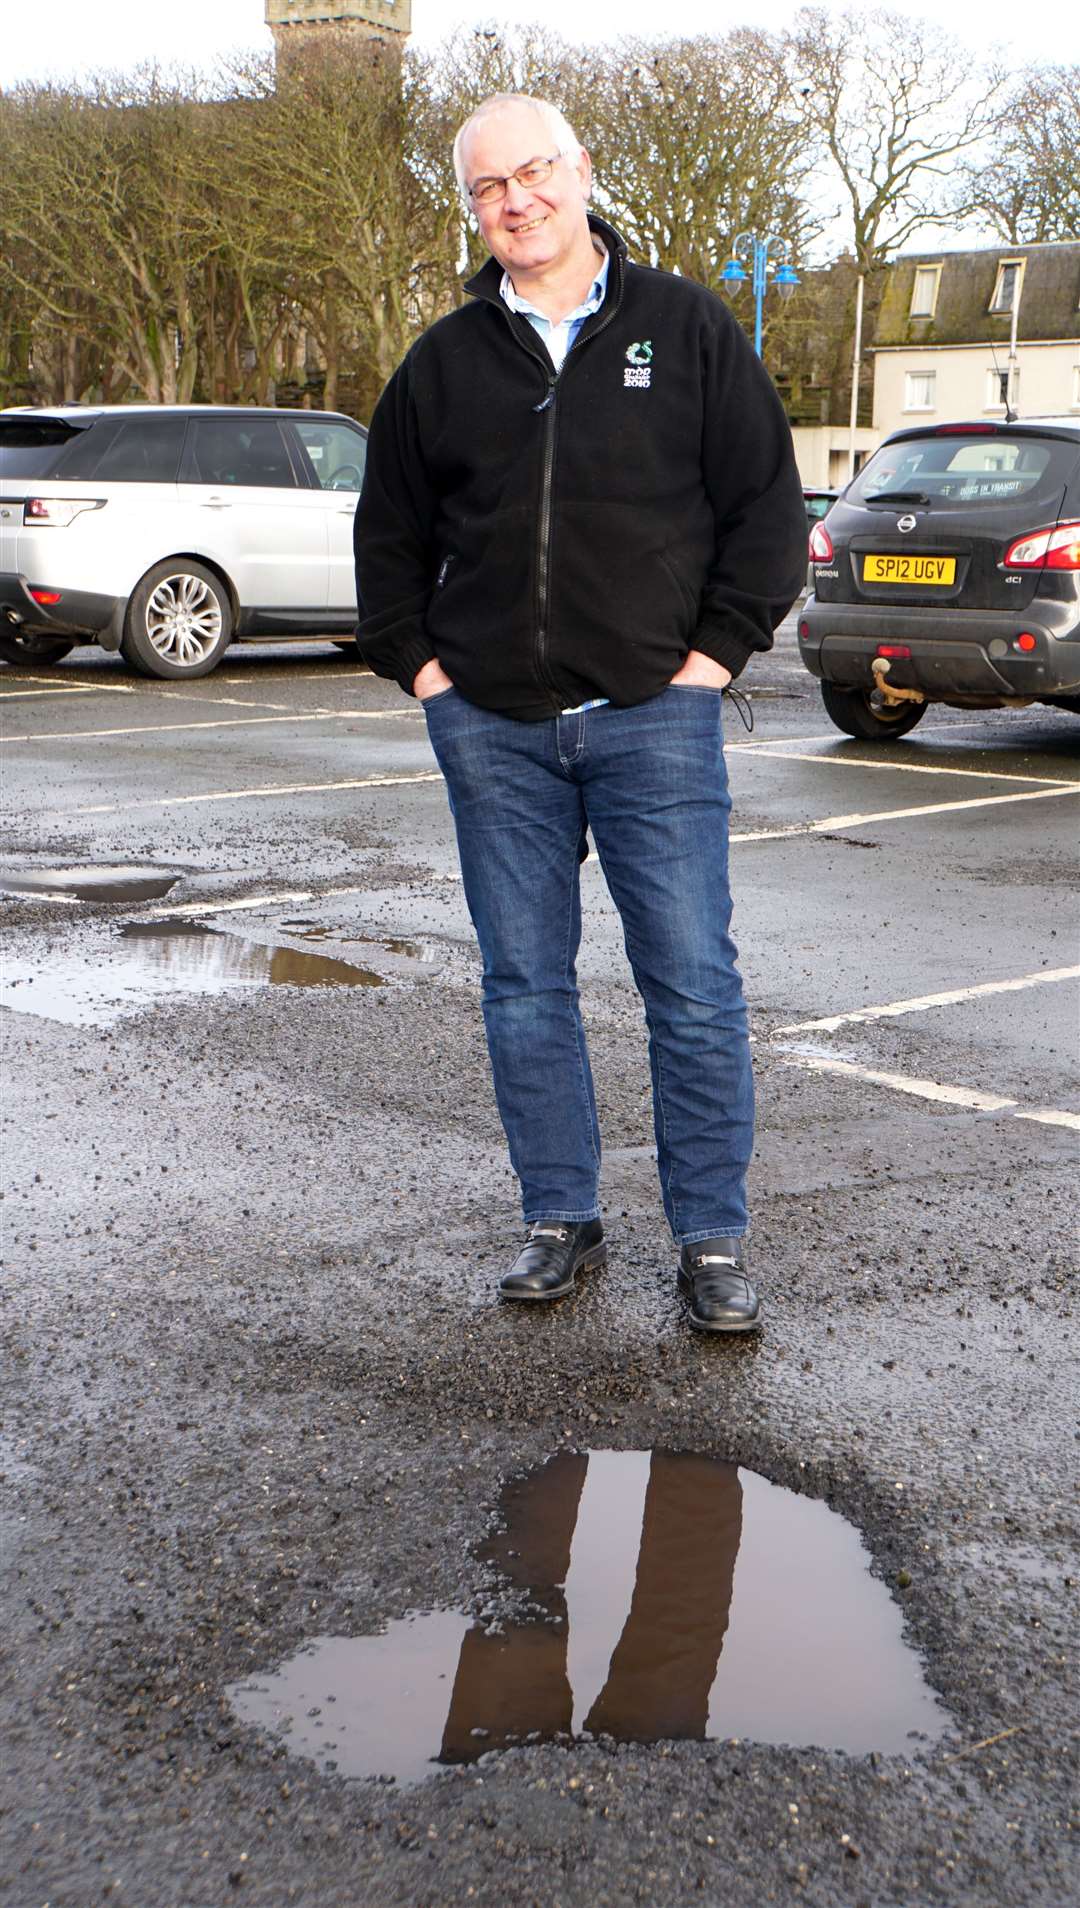 Councillor Bremner pictured last year beside one of the many potholes that drivers had to negotiate around in the badly pockmarked car park. Picture: DGS